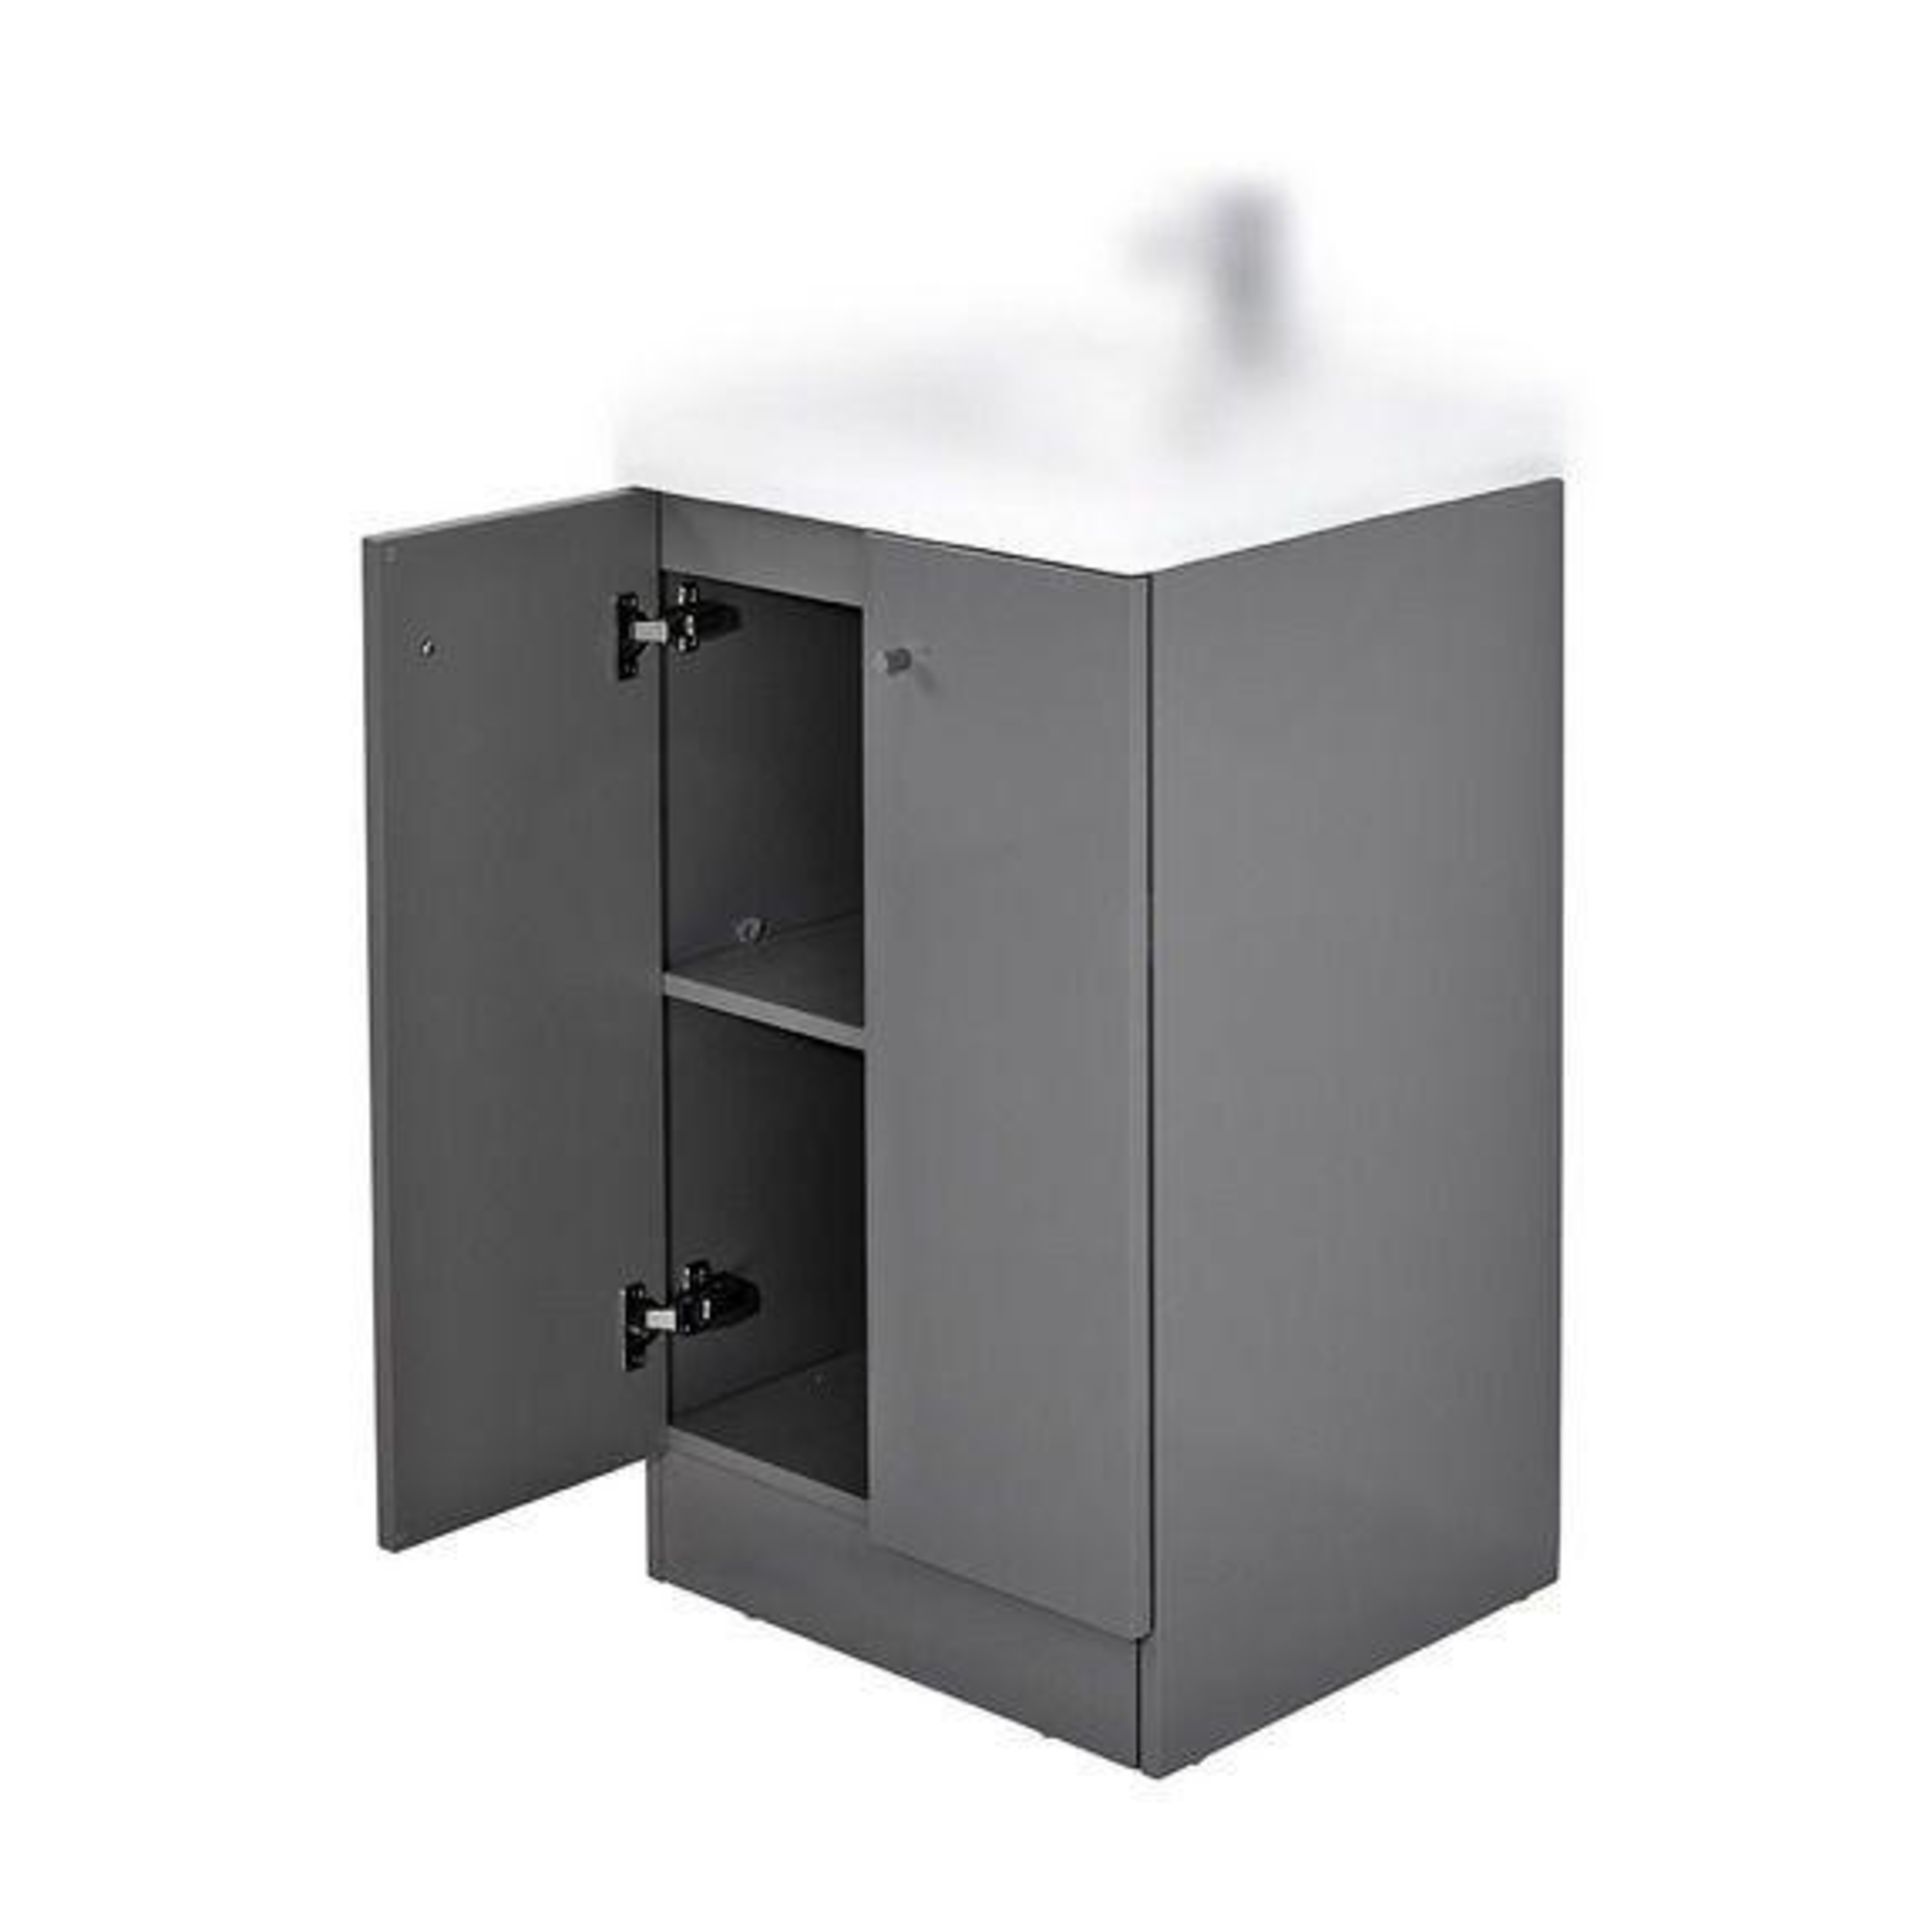 1 x Alpine Duo 500 Floor Standing Vanity Unit - Ultra-Modern Square Design With Soft Close Doors and - Image 5 of 5